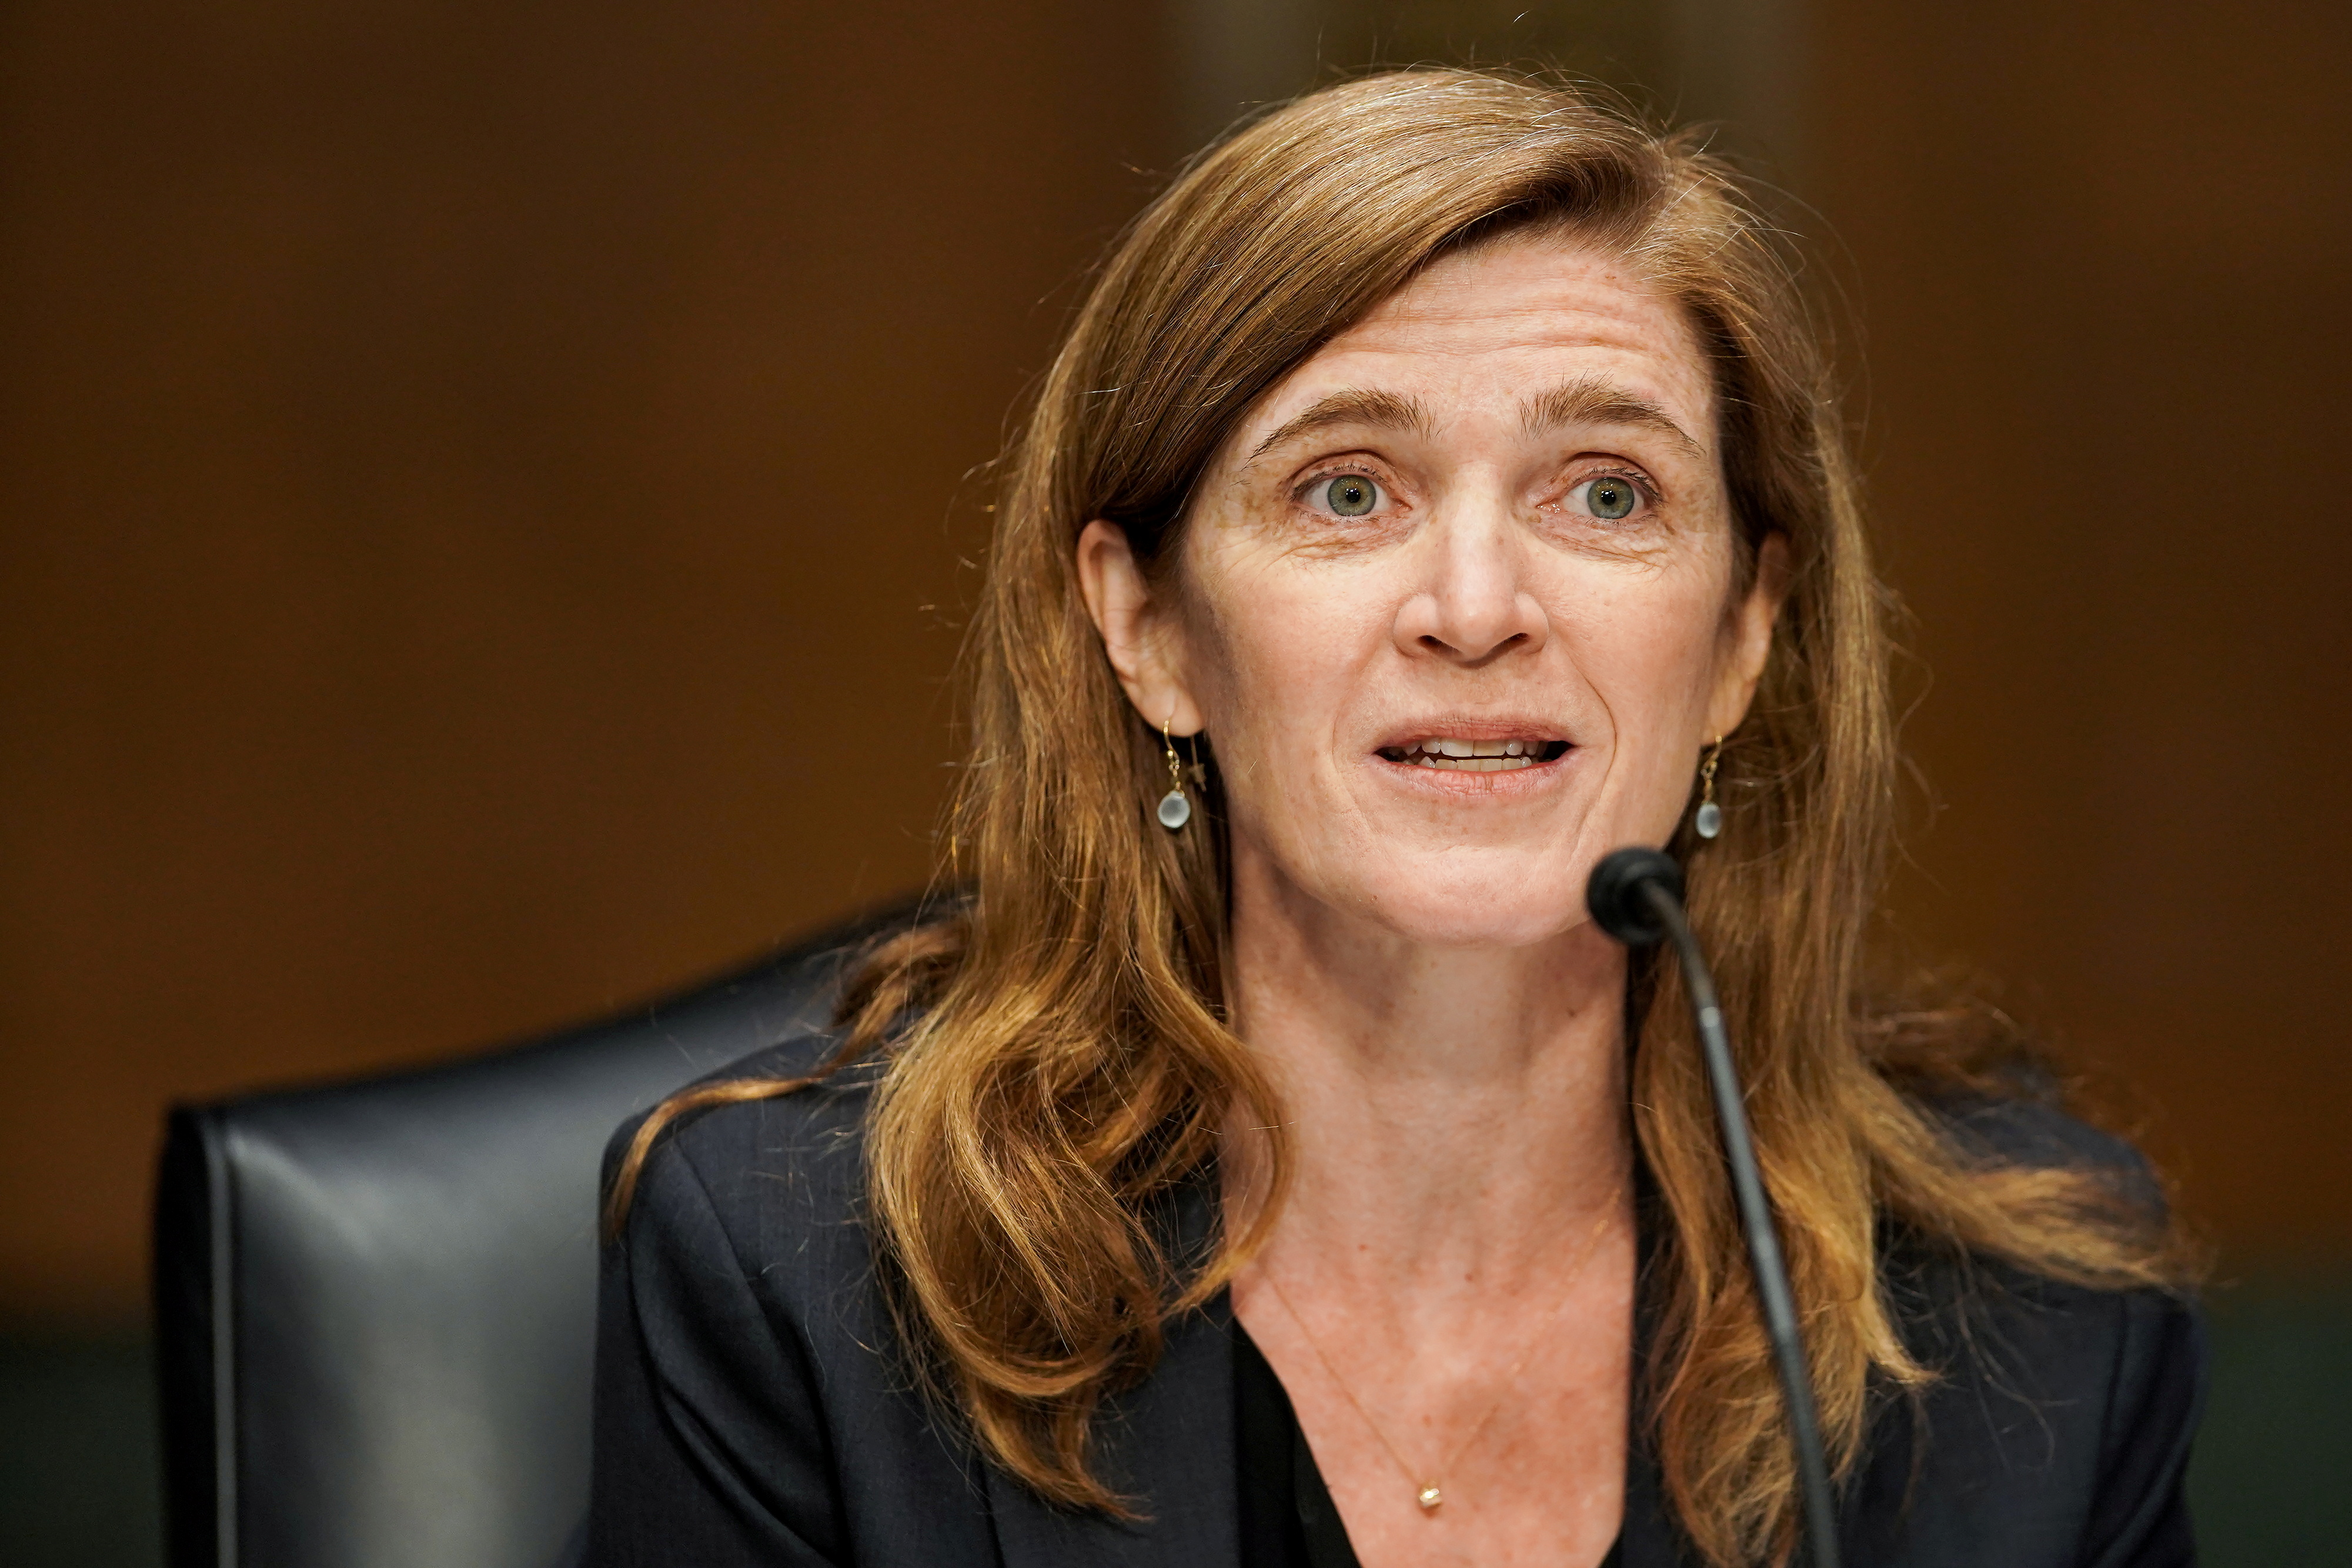 U.S. Senate Foreign Relations Committee confirmation hearing for Samantha Power to lead the U.S. Agency for International Development